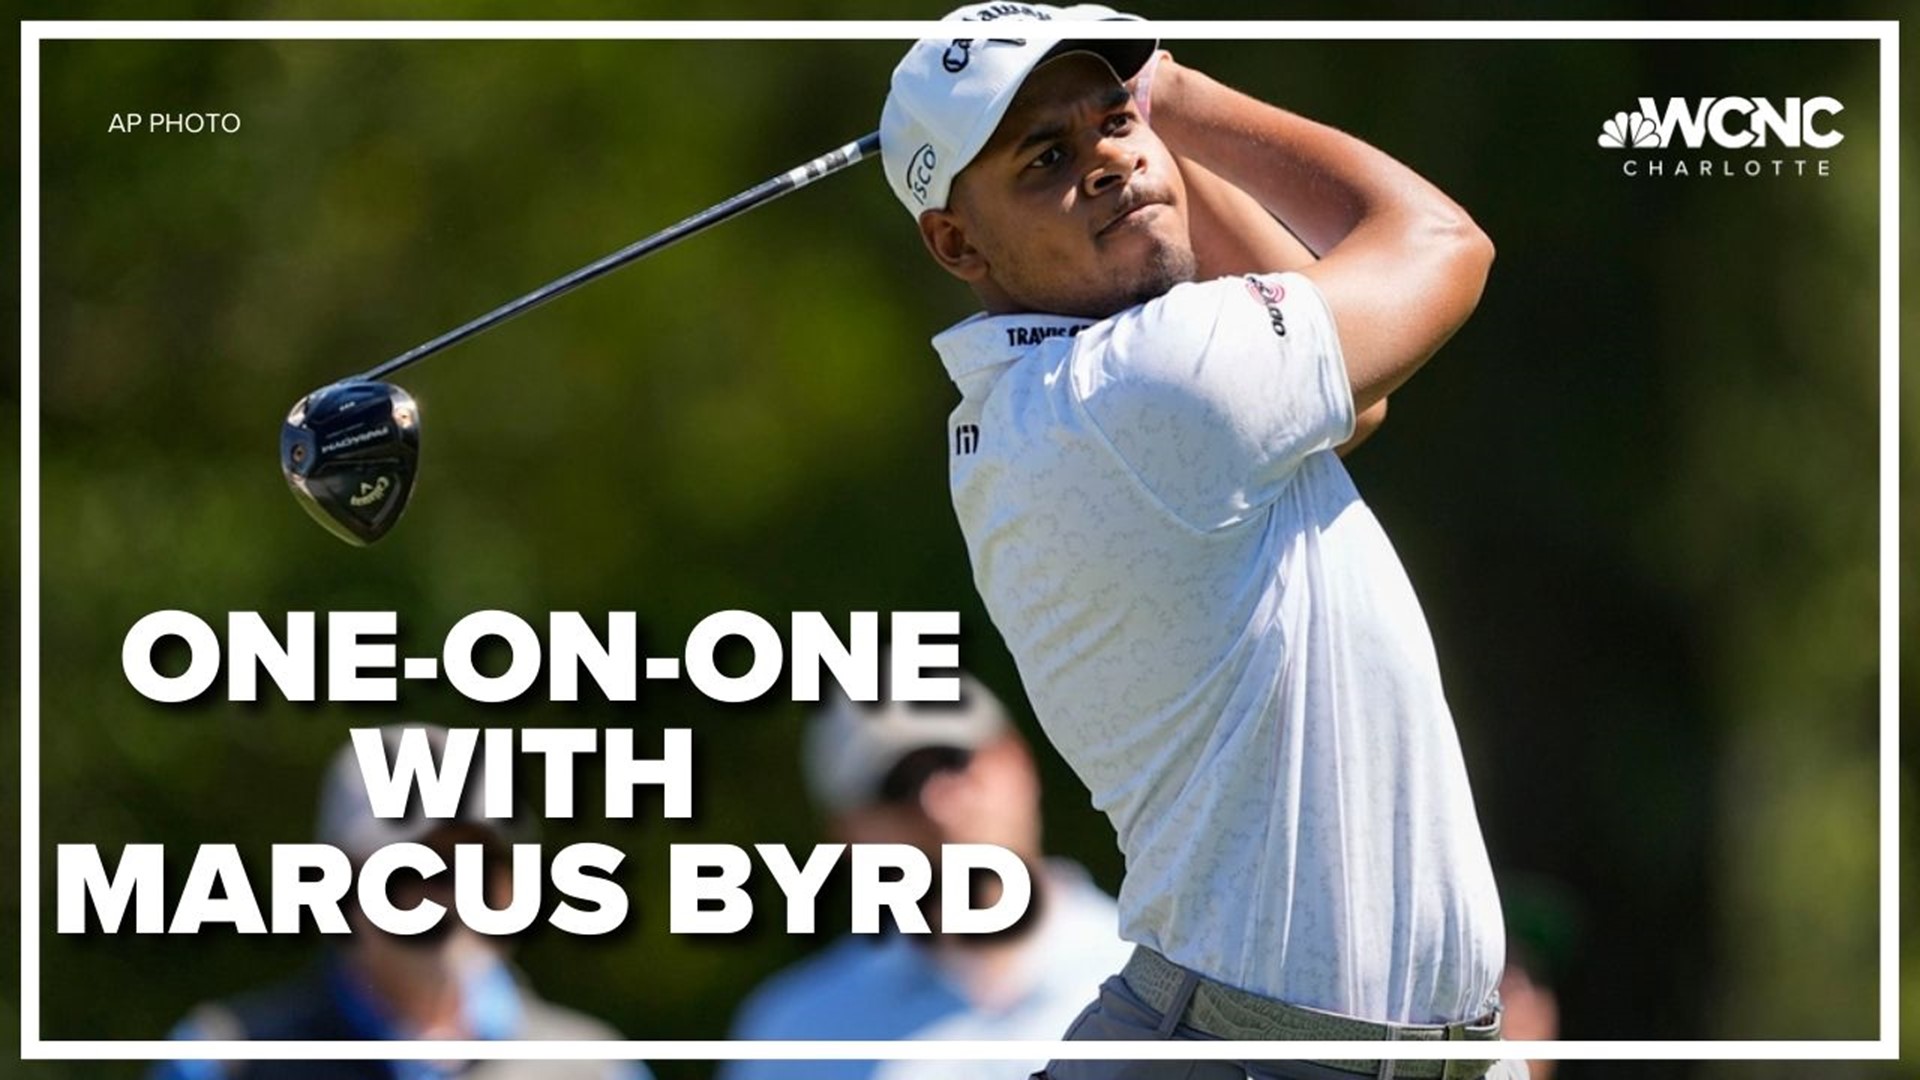 WCNC's Nick Carboni discusses Byrd's determination to play at the Wells Fargo PGA Championship at Quail Hollow.